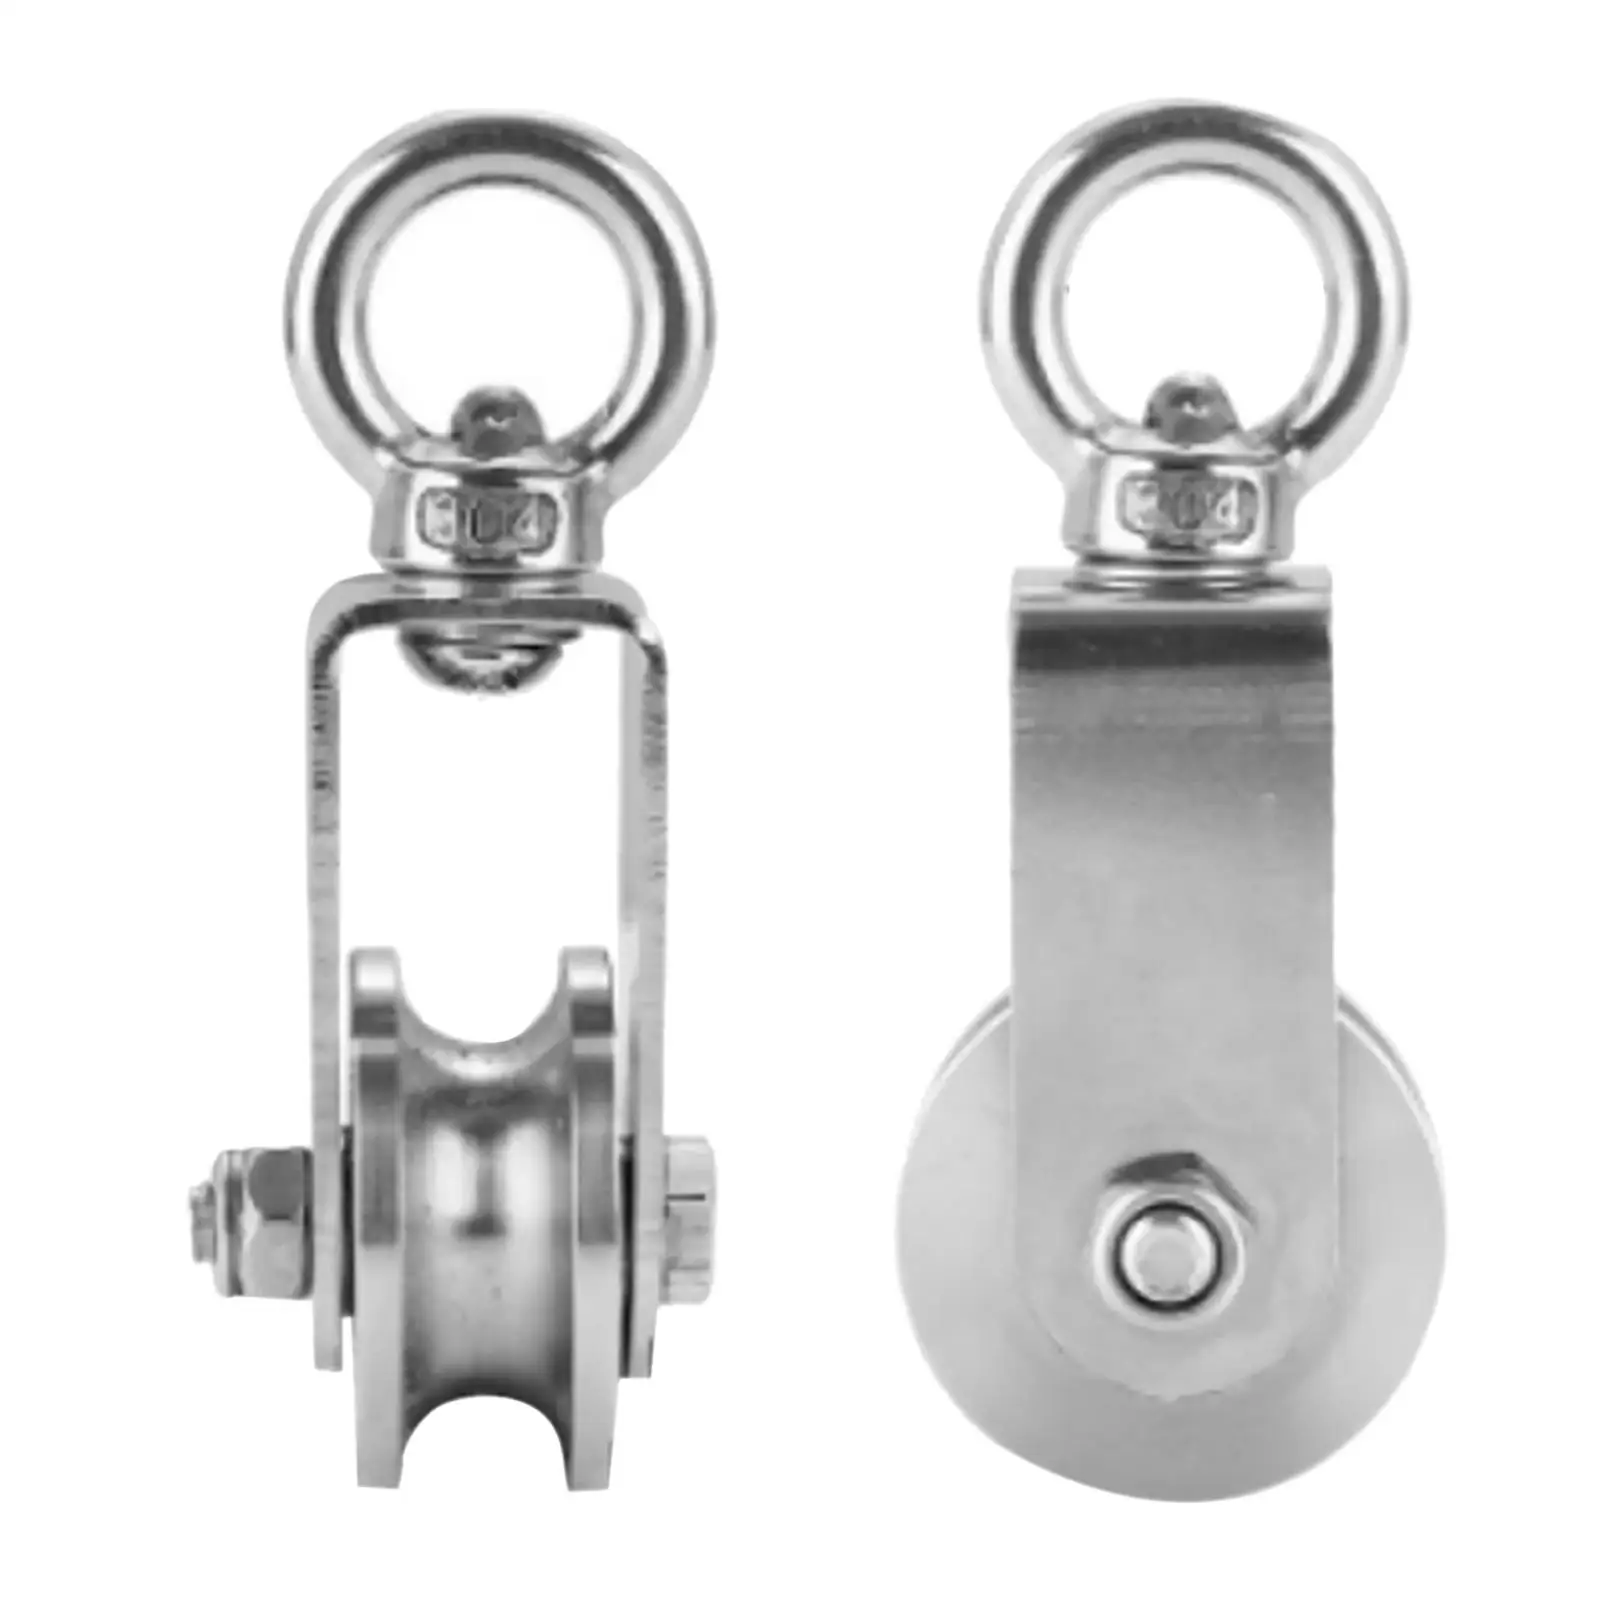 2Pcs Stainless Steel Swivel Pulley Block Gym Equipment Smooth Cable Pulley Wheel Pulley for Gym Wire Maintenance DIY Attachment